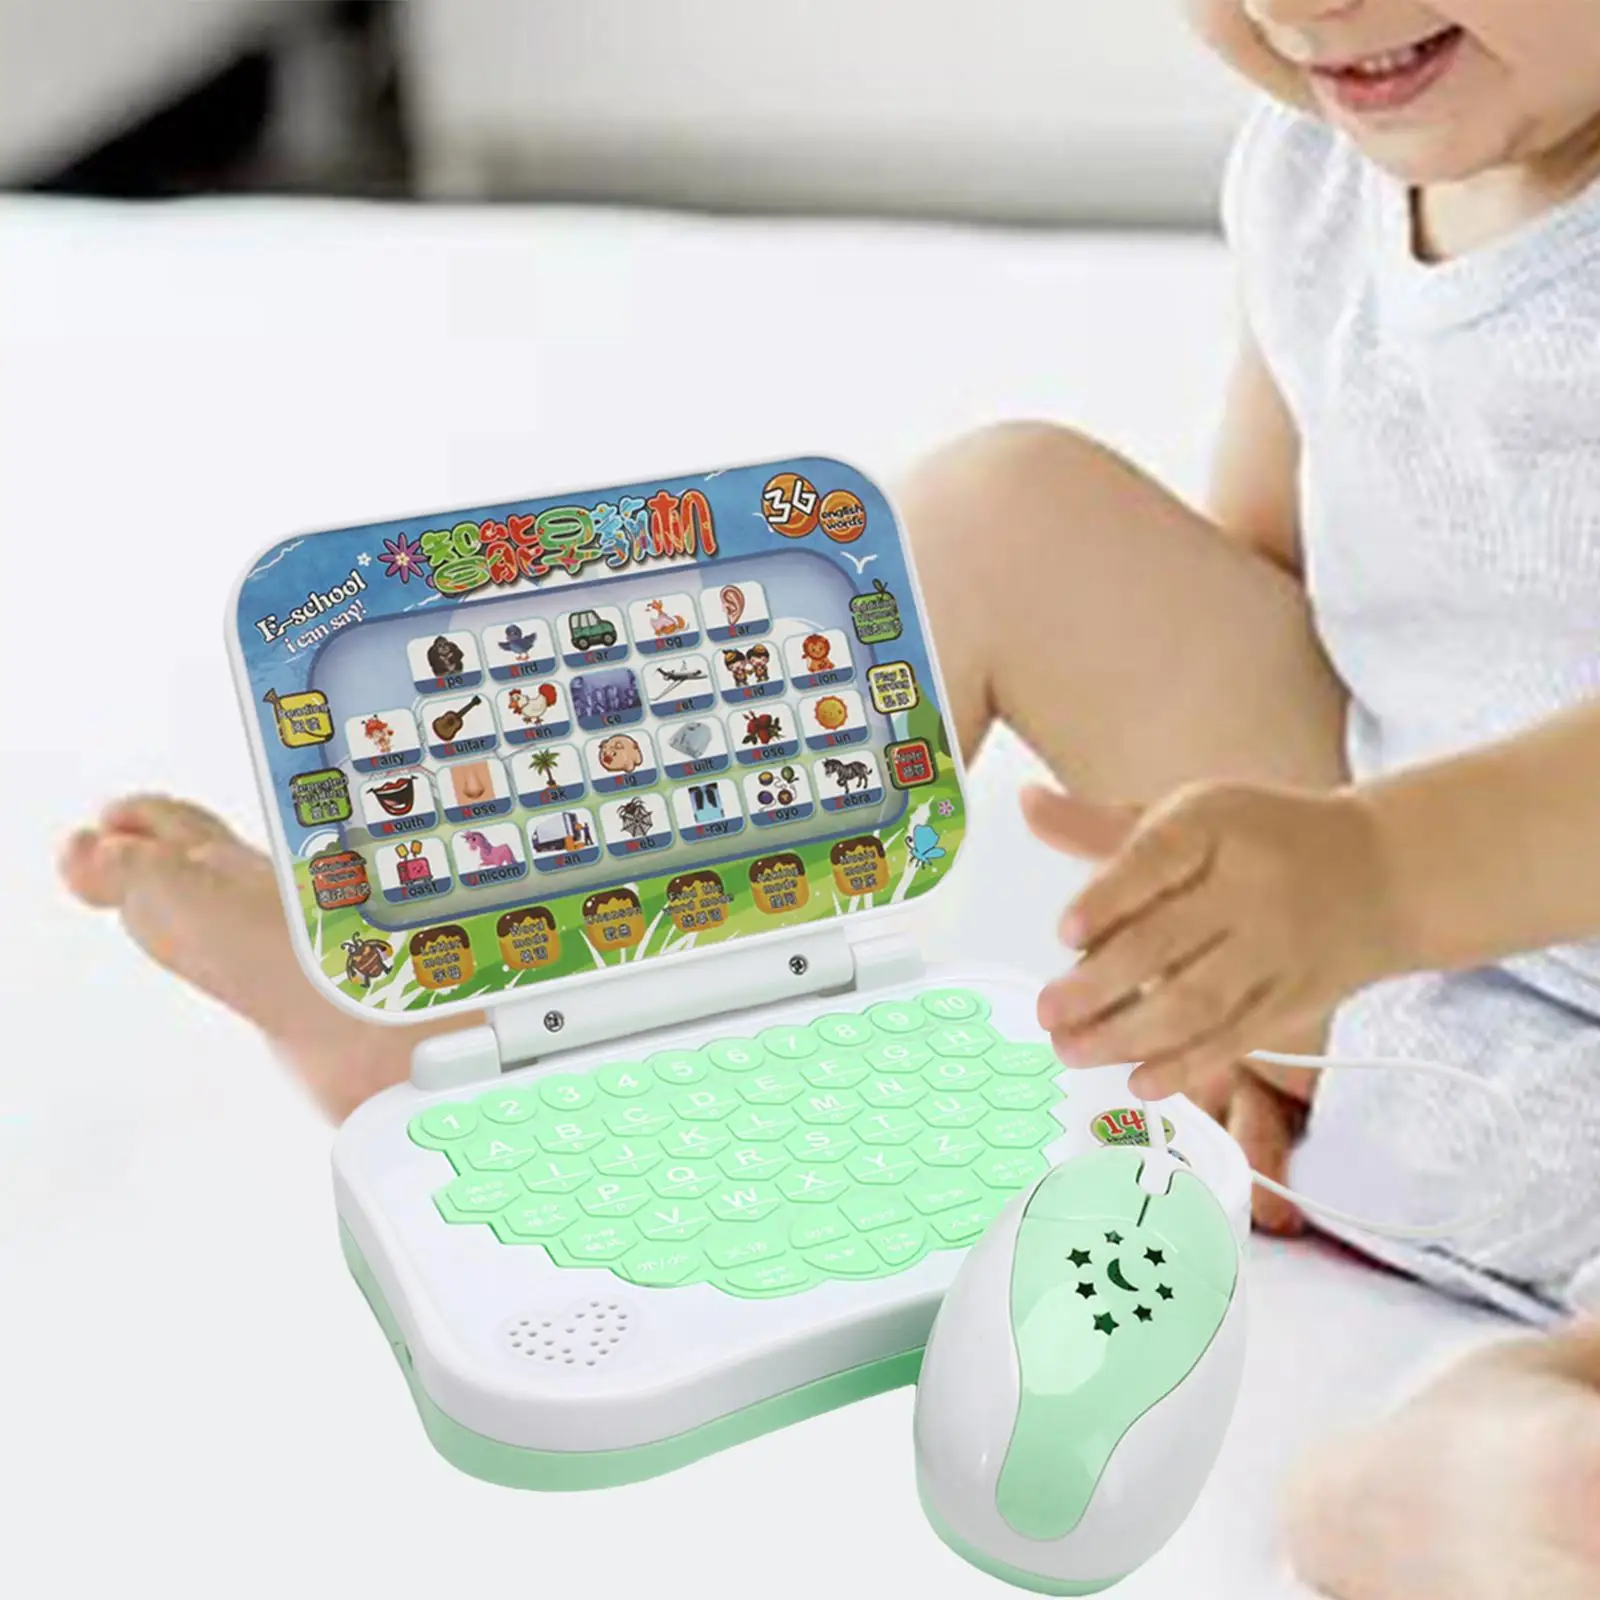 Multifunction Learning Machine Study Game Early Education Activities Computer Kids Laptop Toy for Girls Boys Toddler Kids